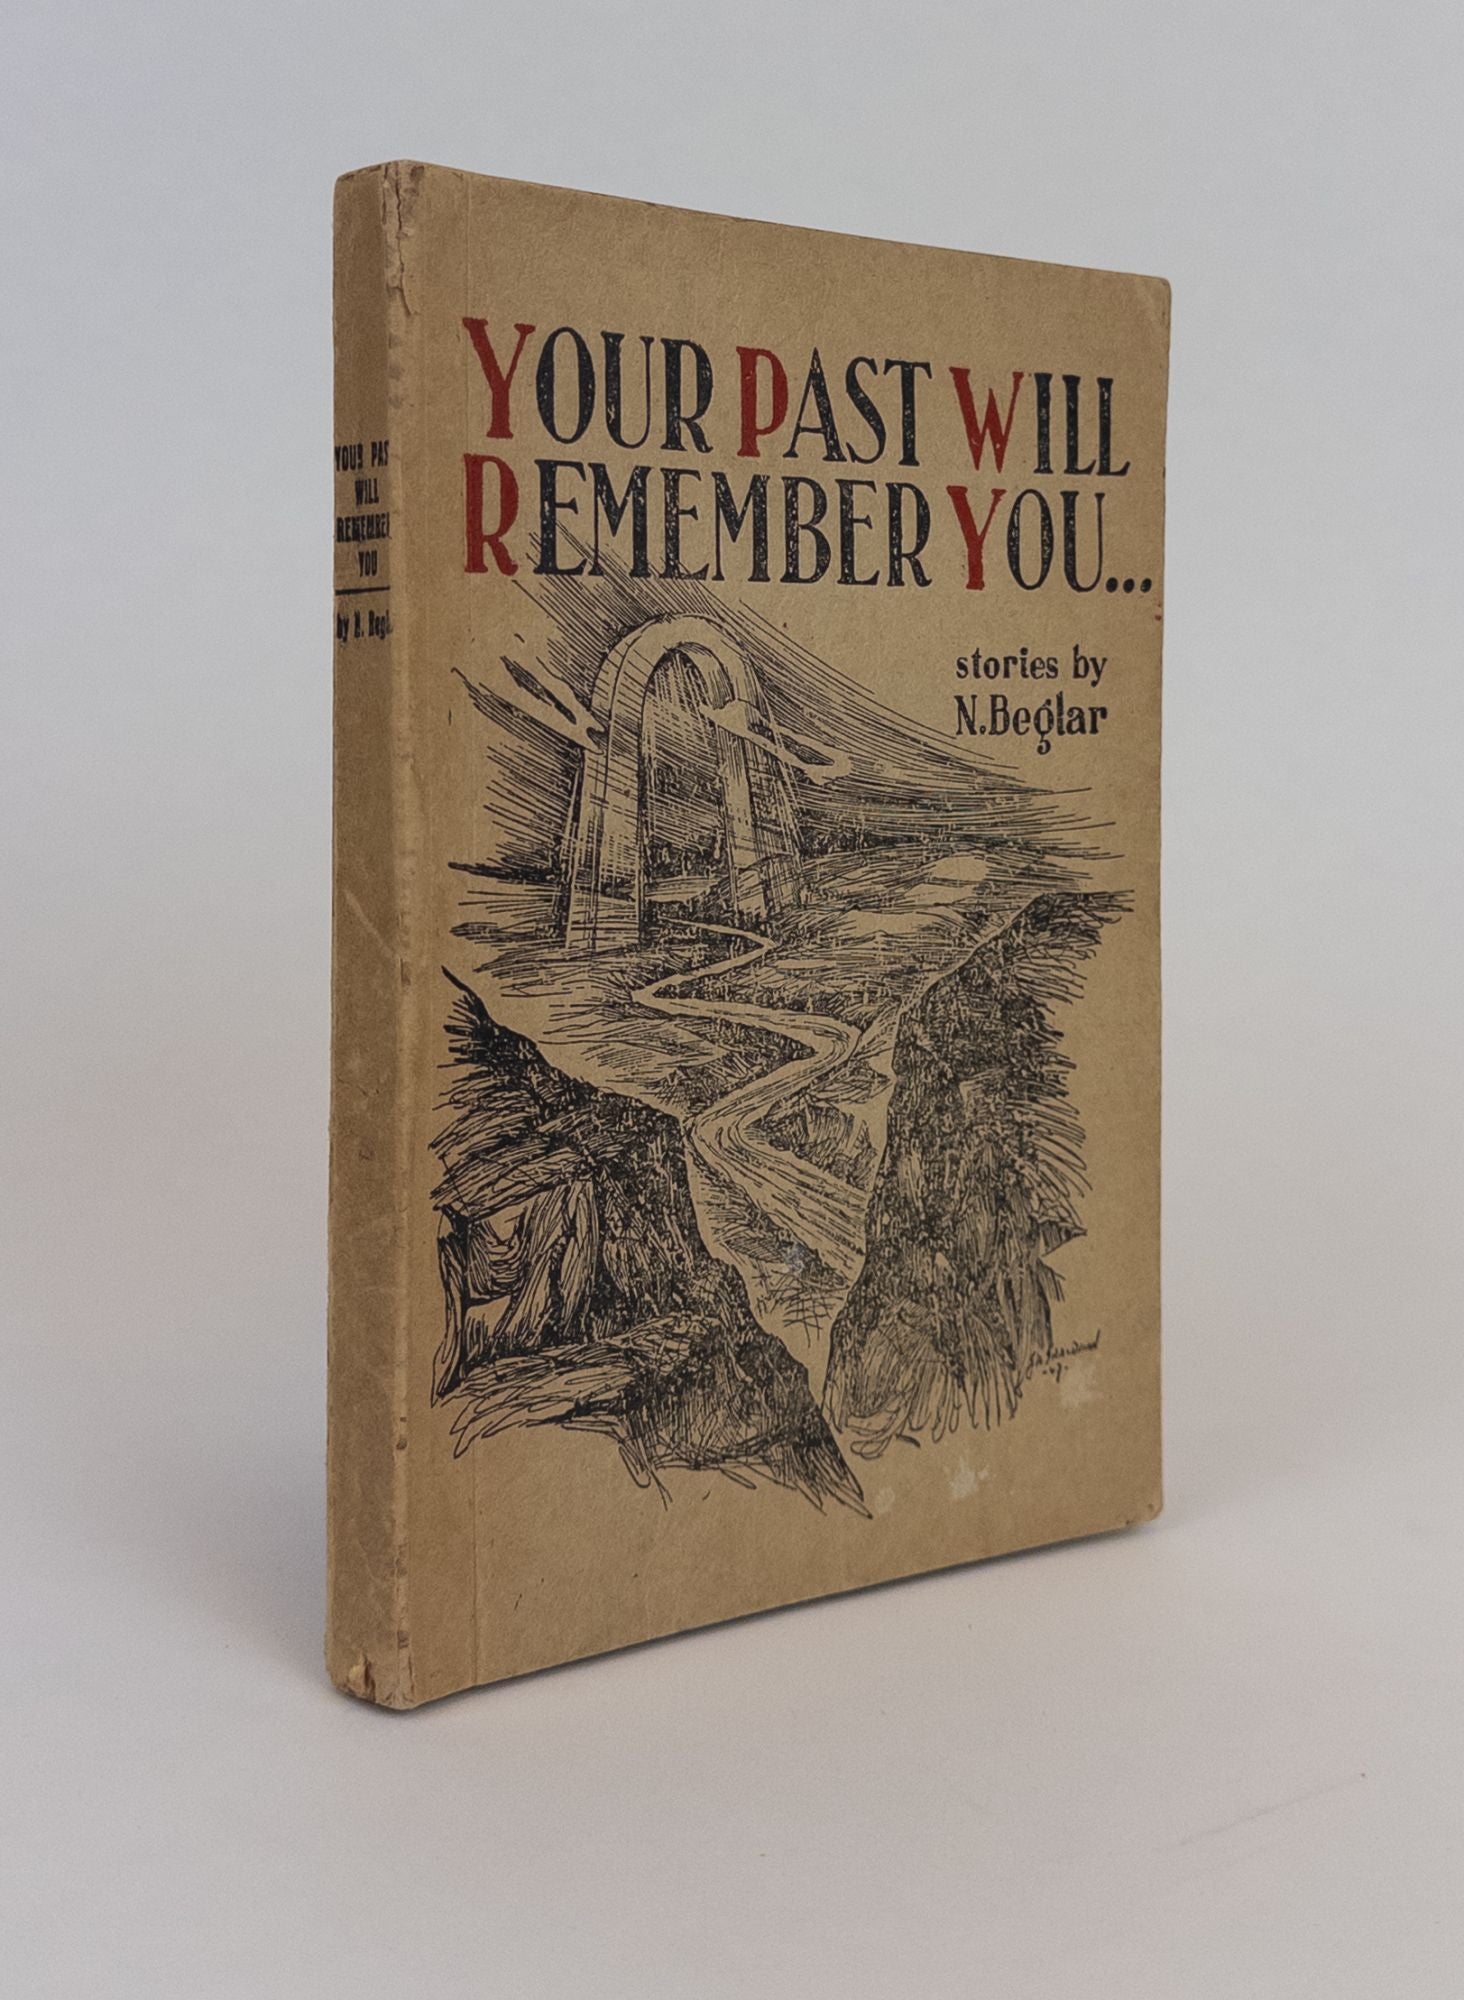 Product Image for YOUR PAST WILL REMEMBER YOU... [Signed Presentation Copy]